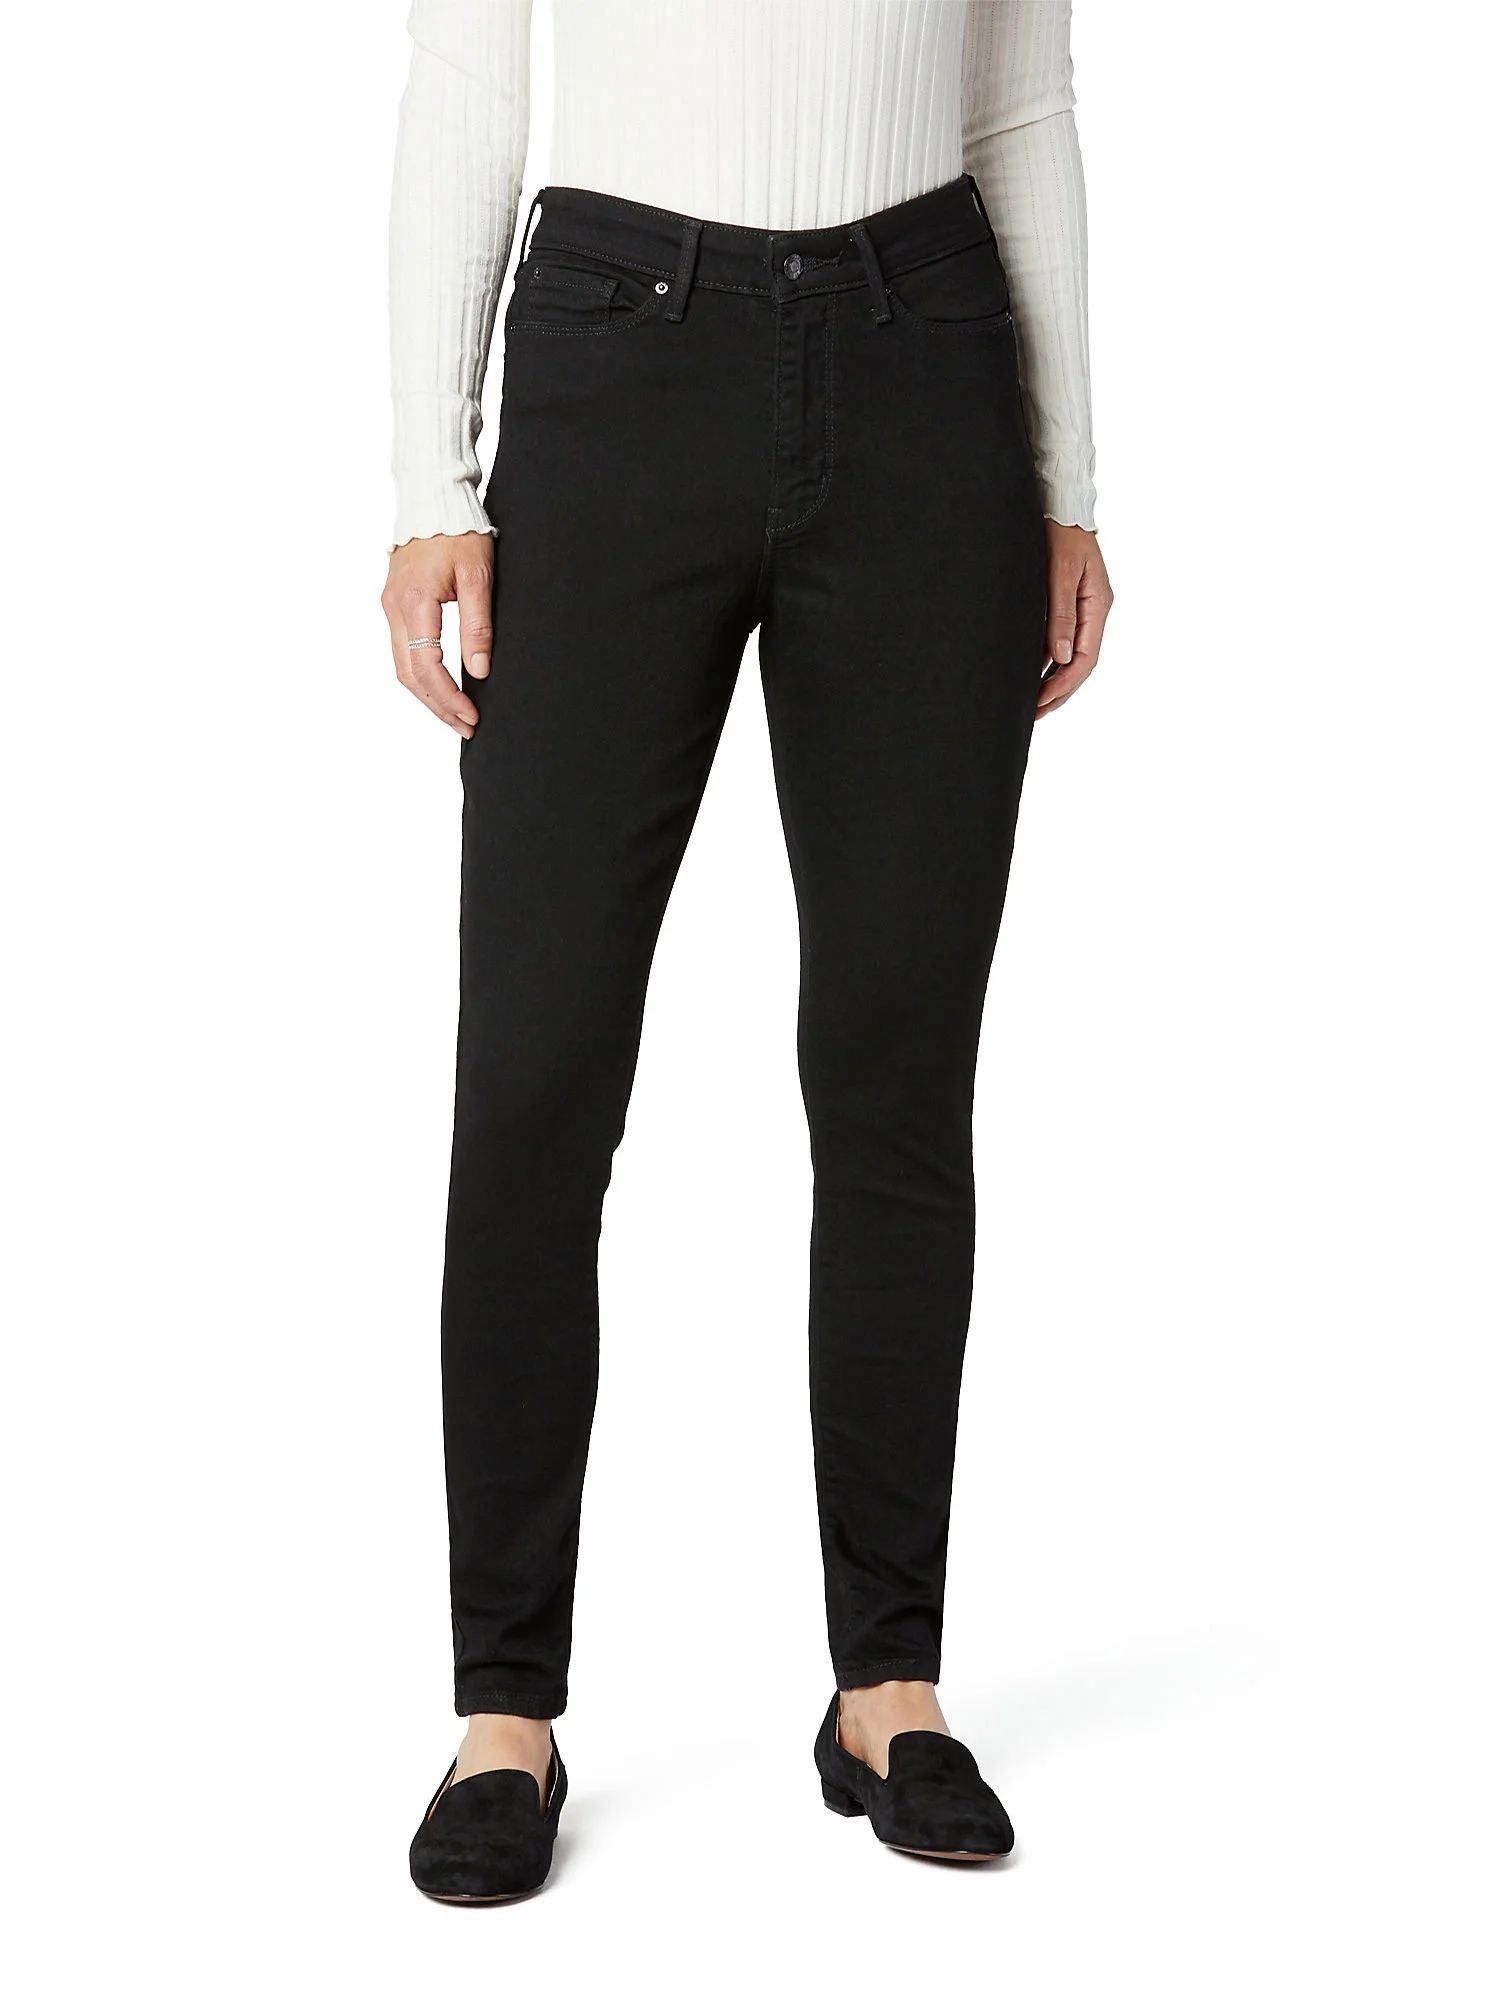 Signature by Levi Strauss & Co. Women’s High Rise Jeans, Sizes 2-20 | Walmart (US)